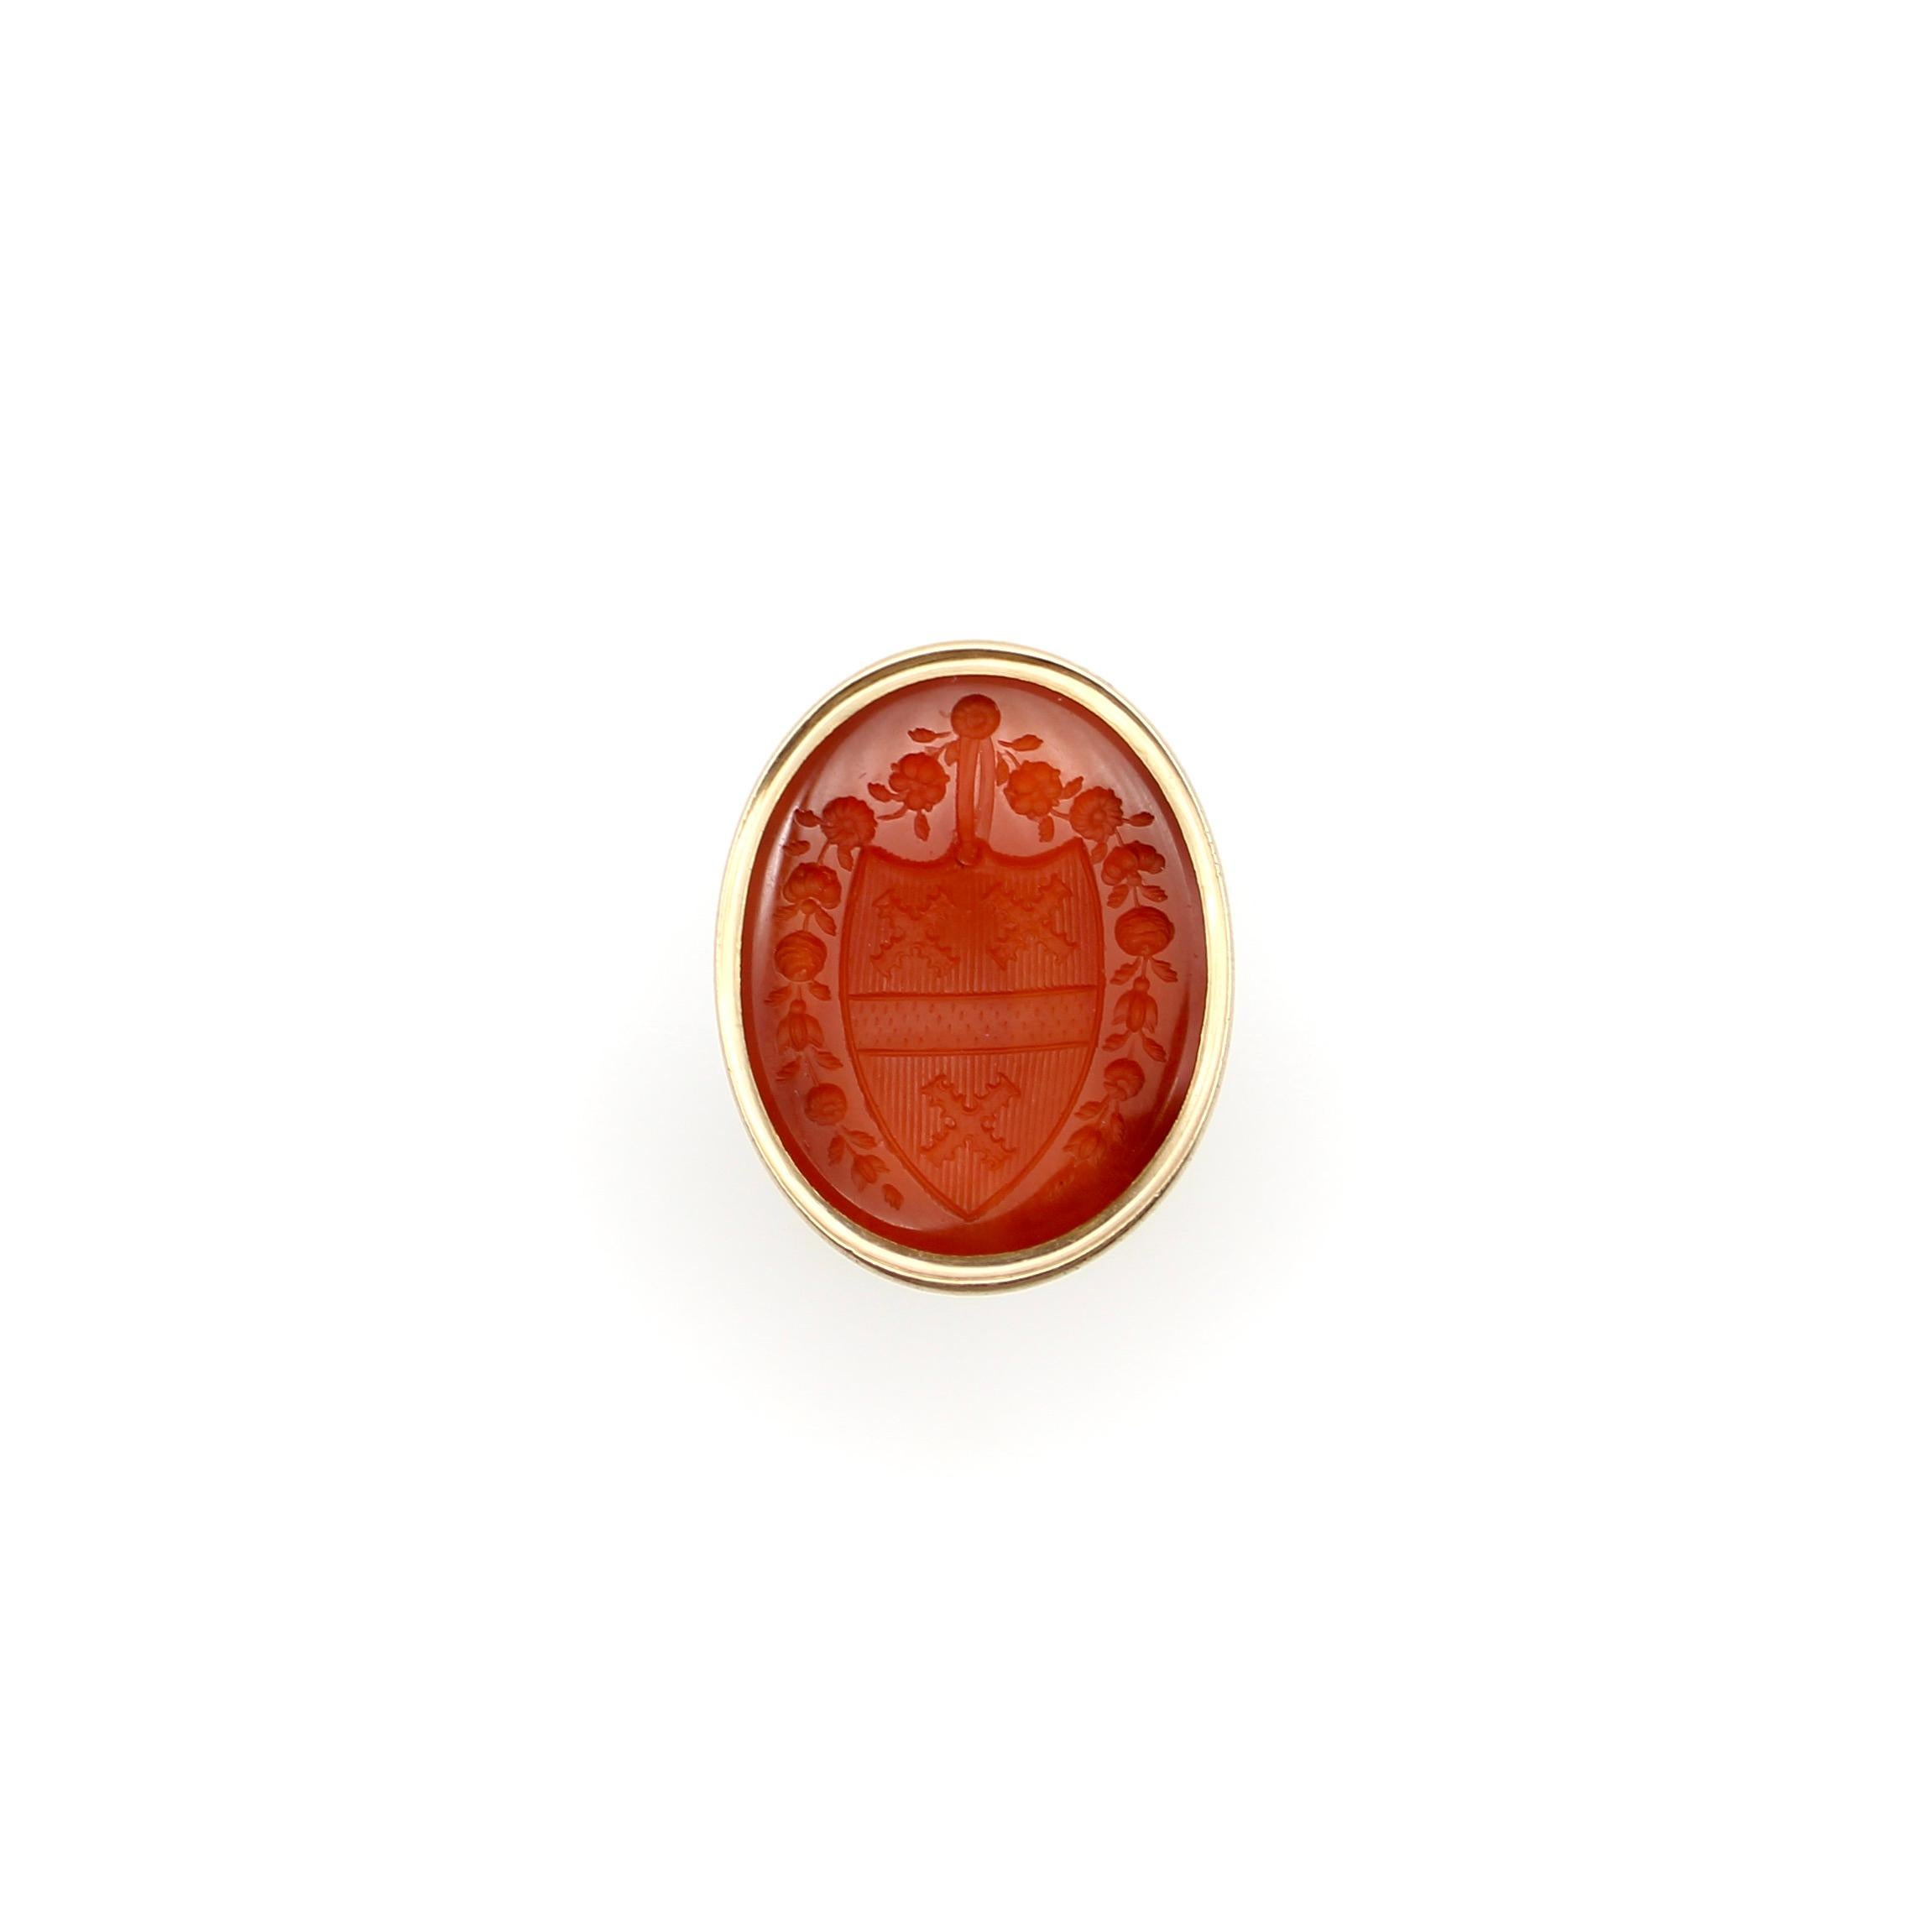 This Georgian intaglio fob features a detailed family crest, carved into beautiful carnelian. The crest contains three crosses, bisected by a dotted bar. Surrounding the crest, a garland of blooming flowers is draped along each side. The intaglio is